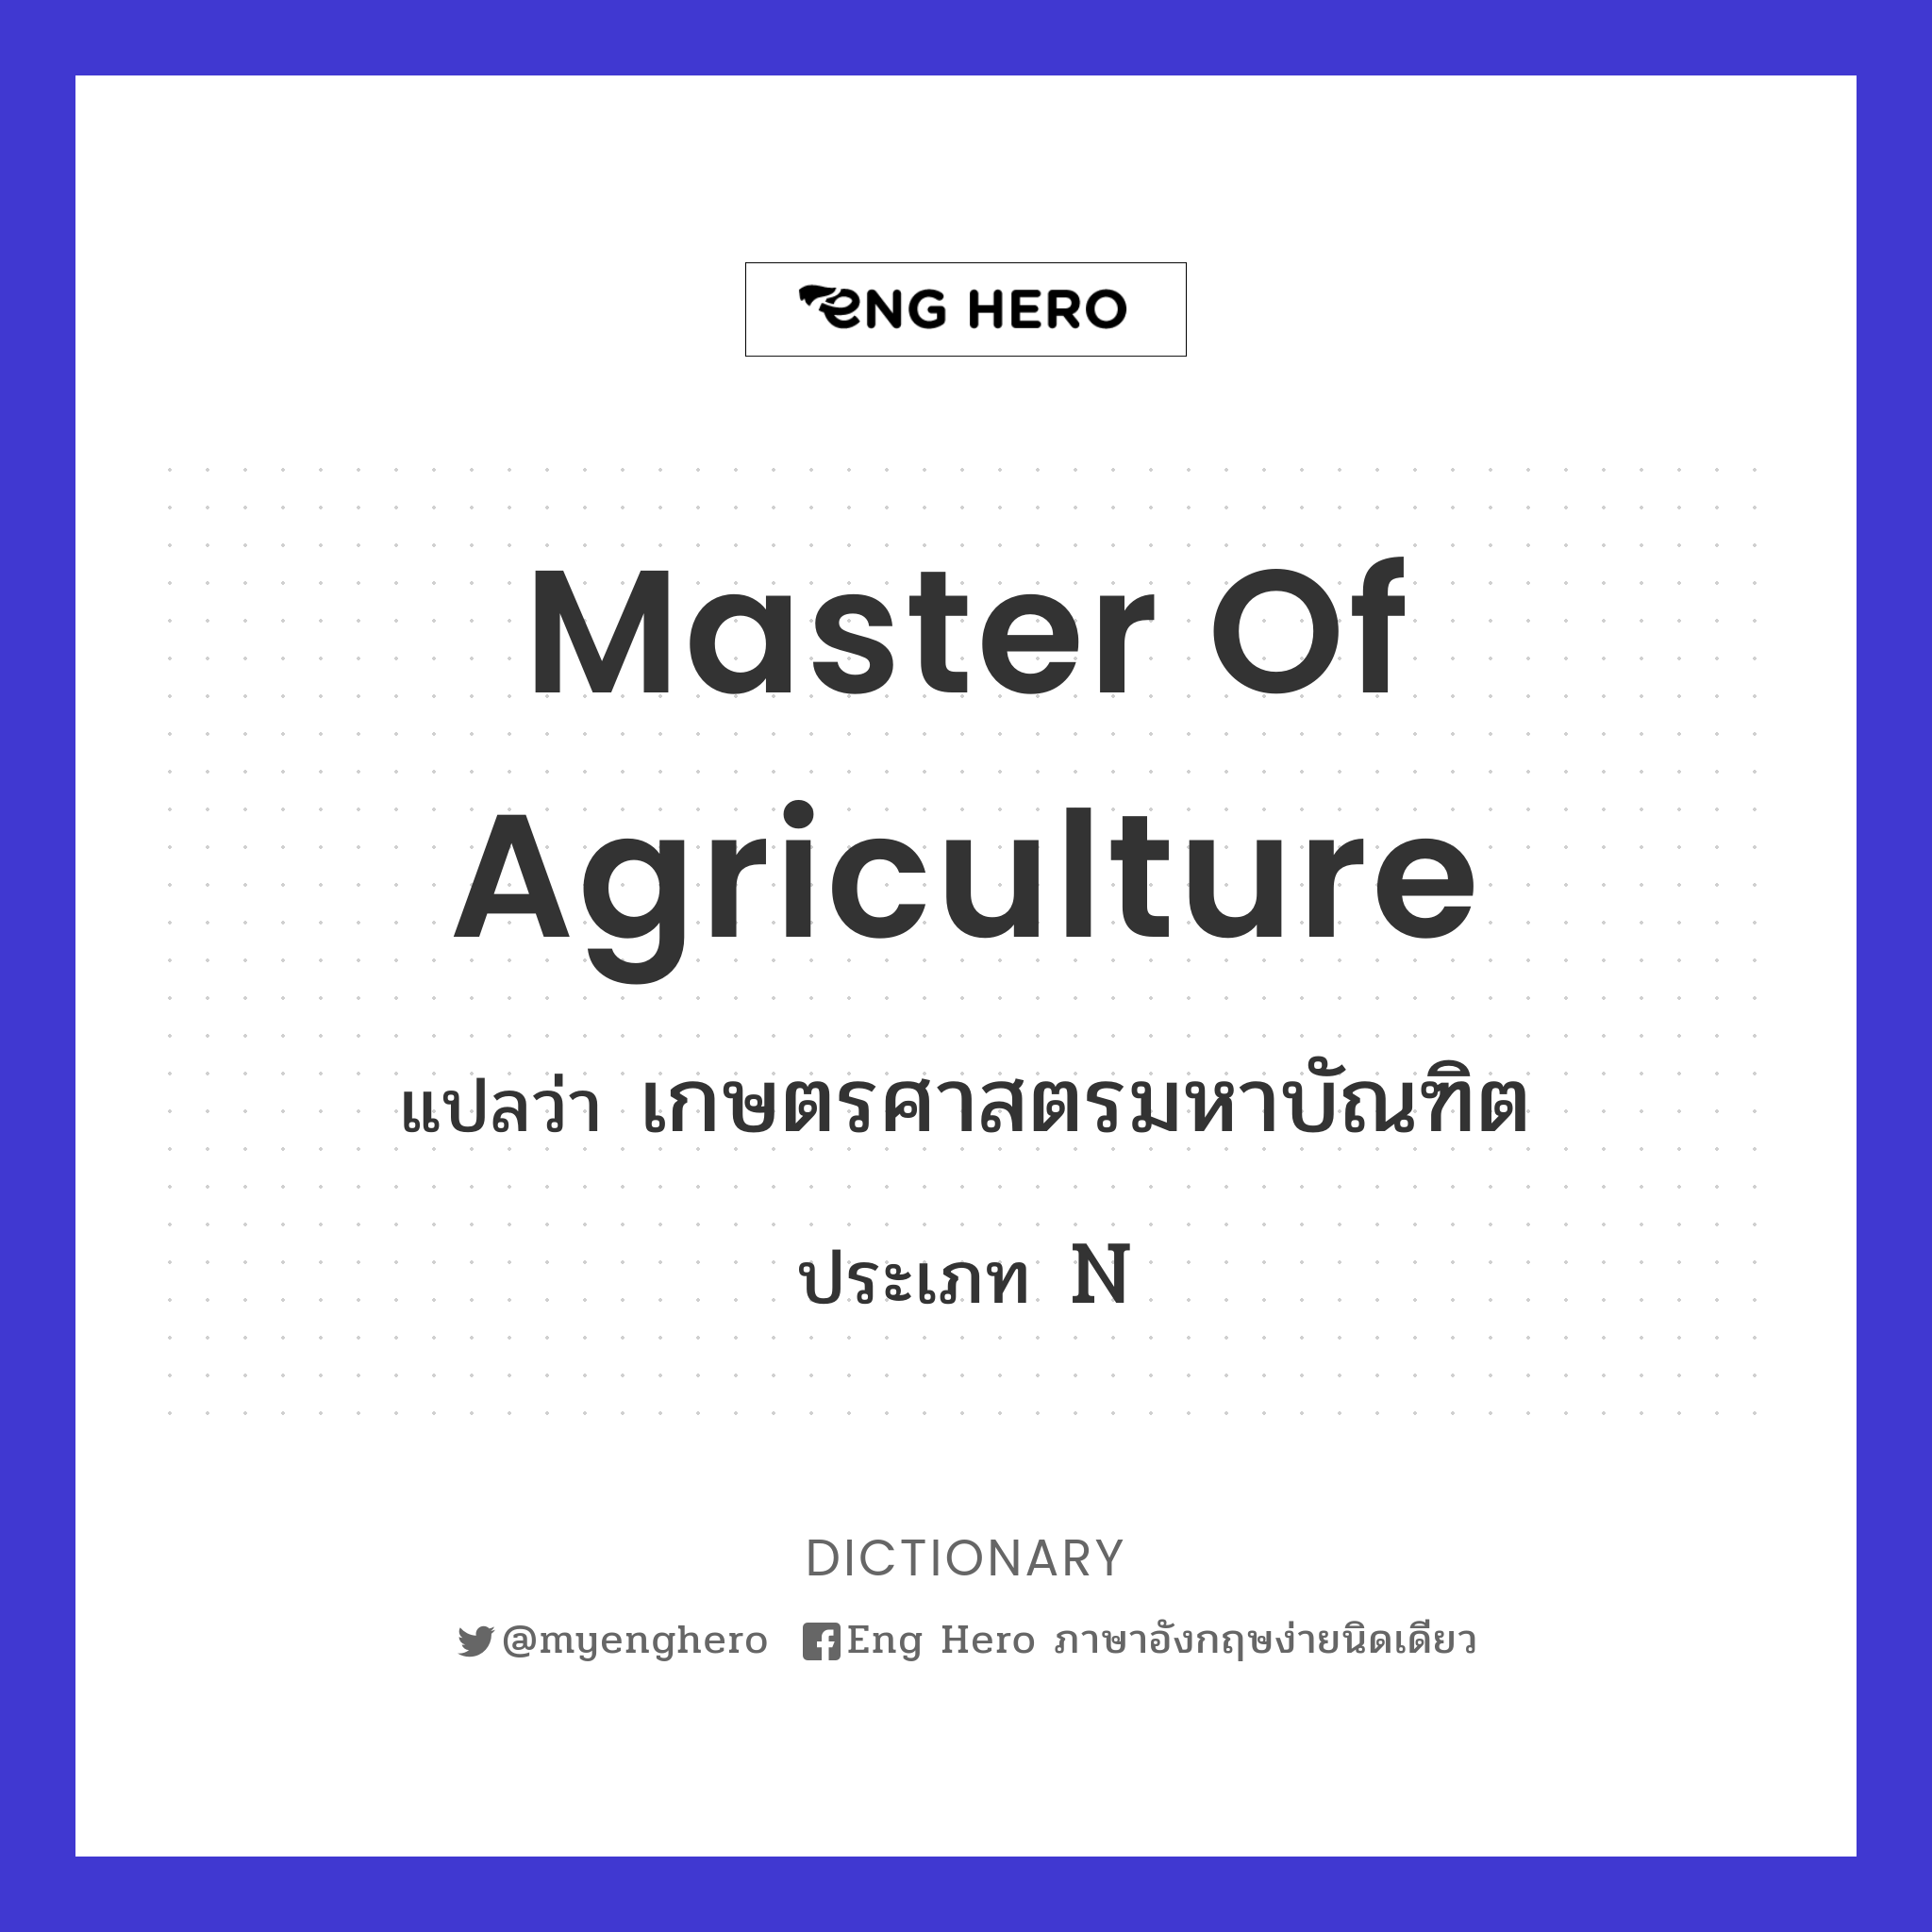 Master of Agriculture